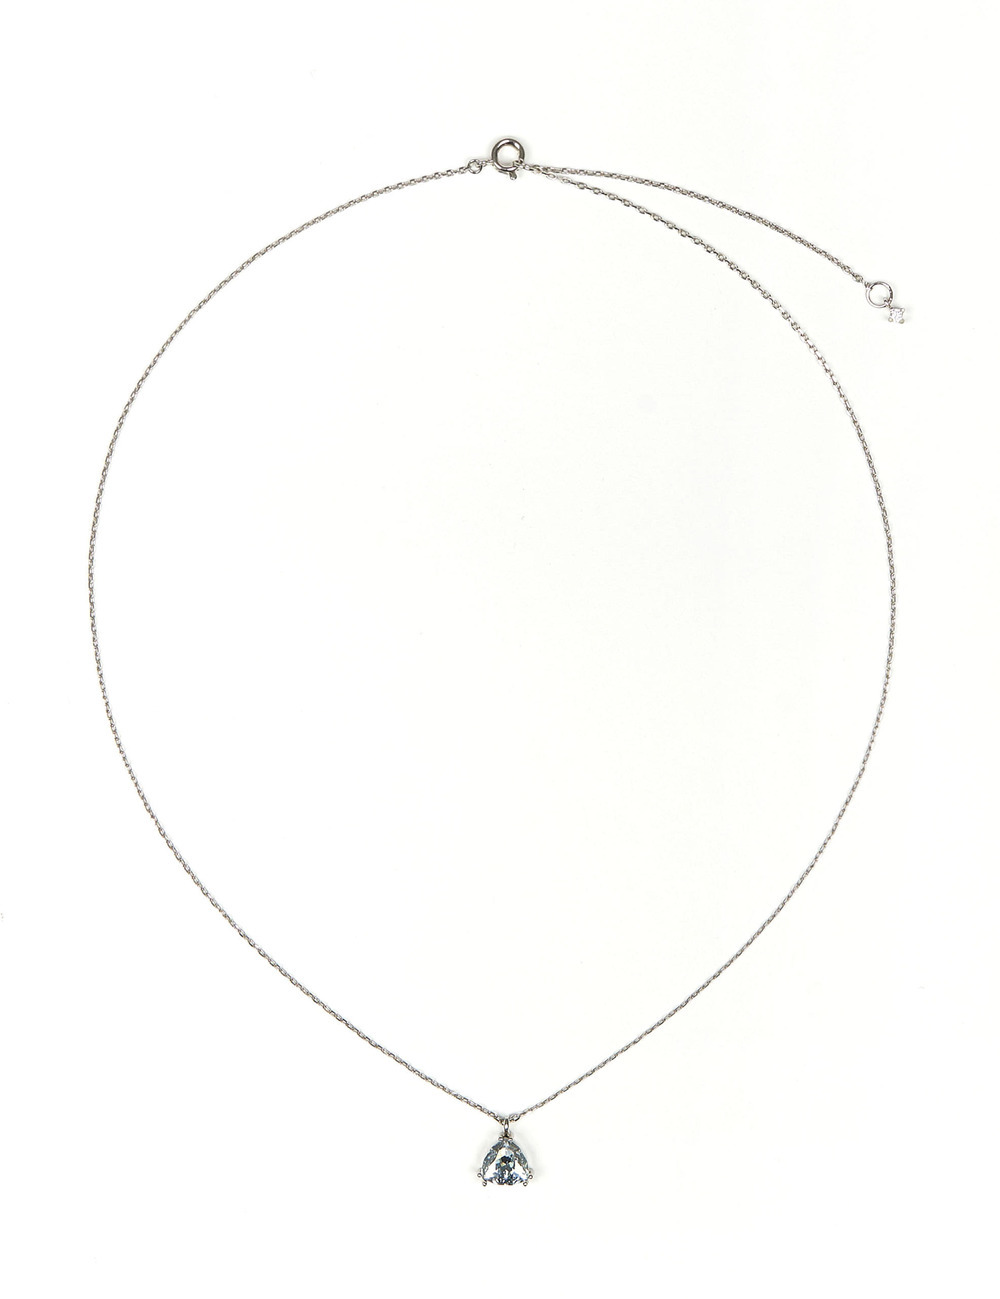 Trilliant triangle necklace_ Shimmer blue